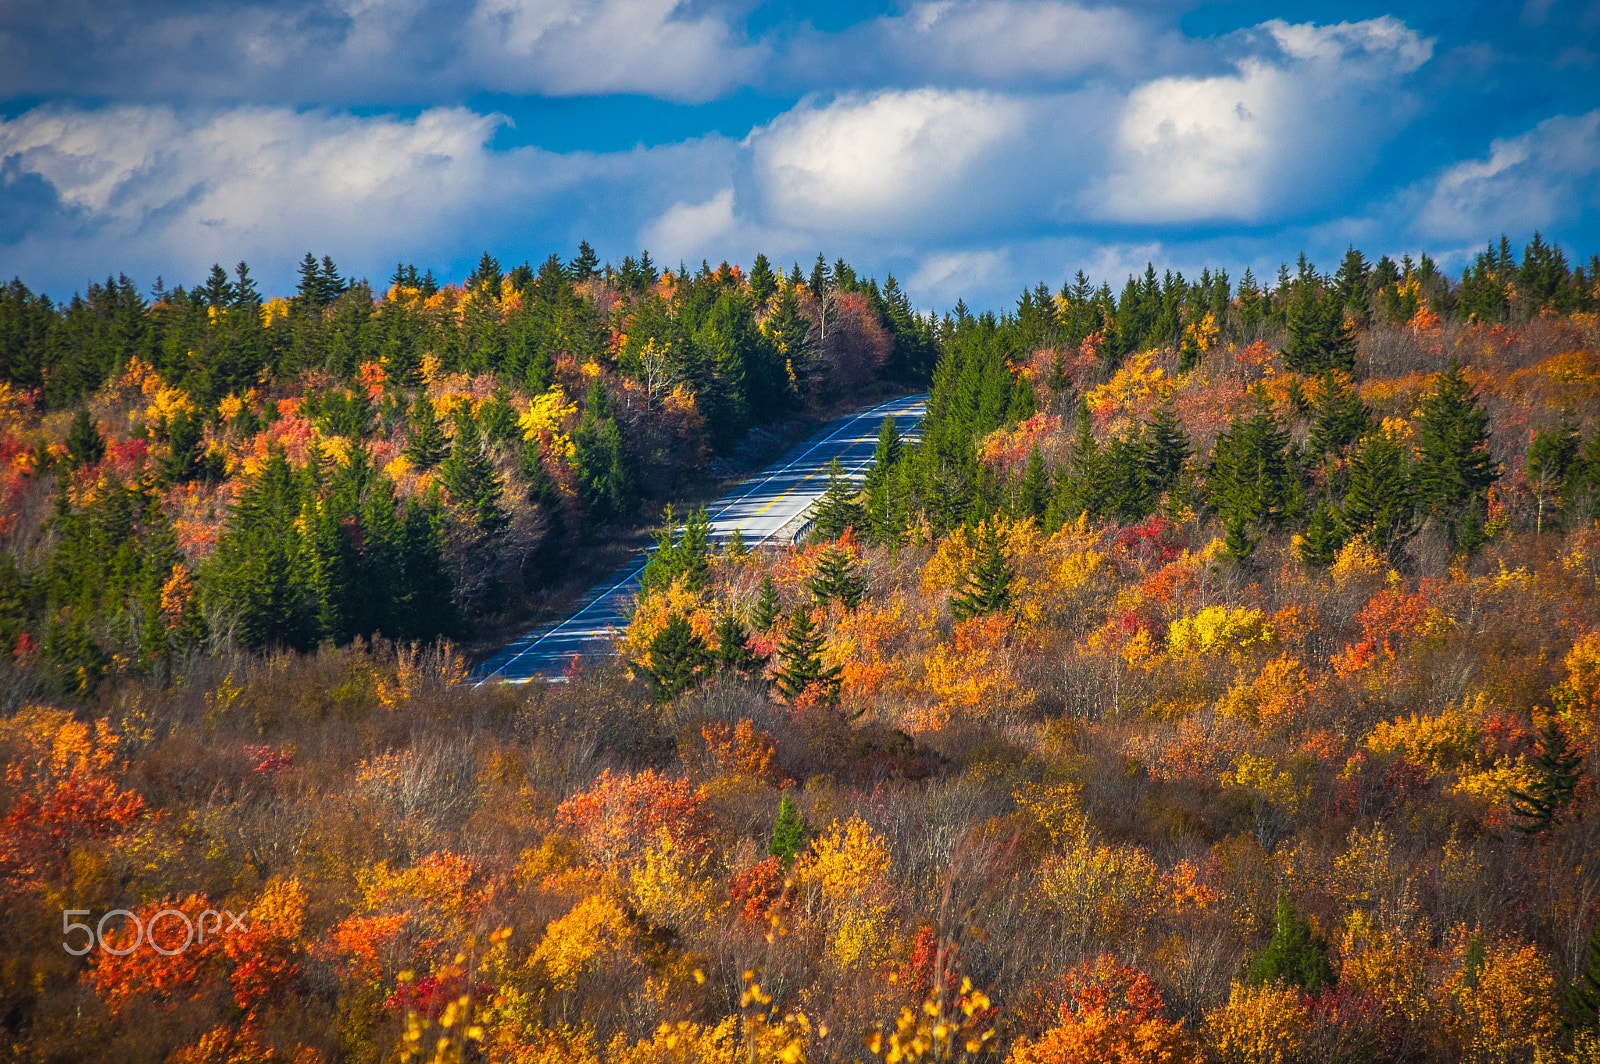 Pentax K-3 II sample photo. The highland scenic highway in autumn photography